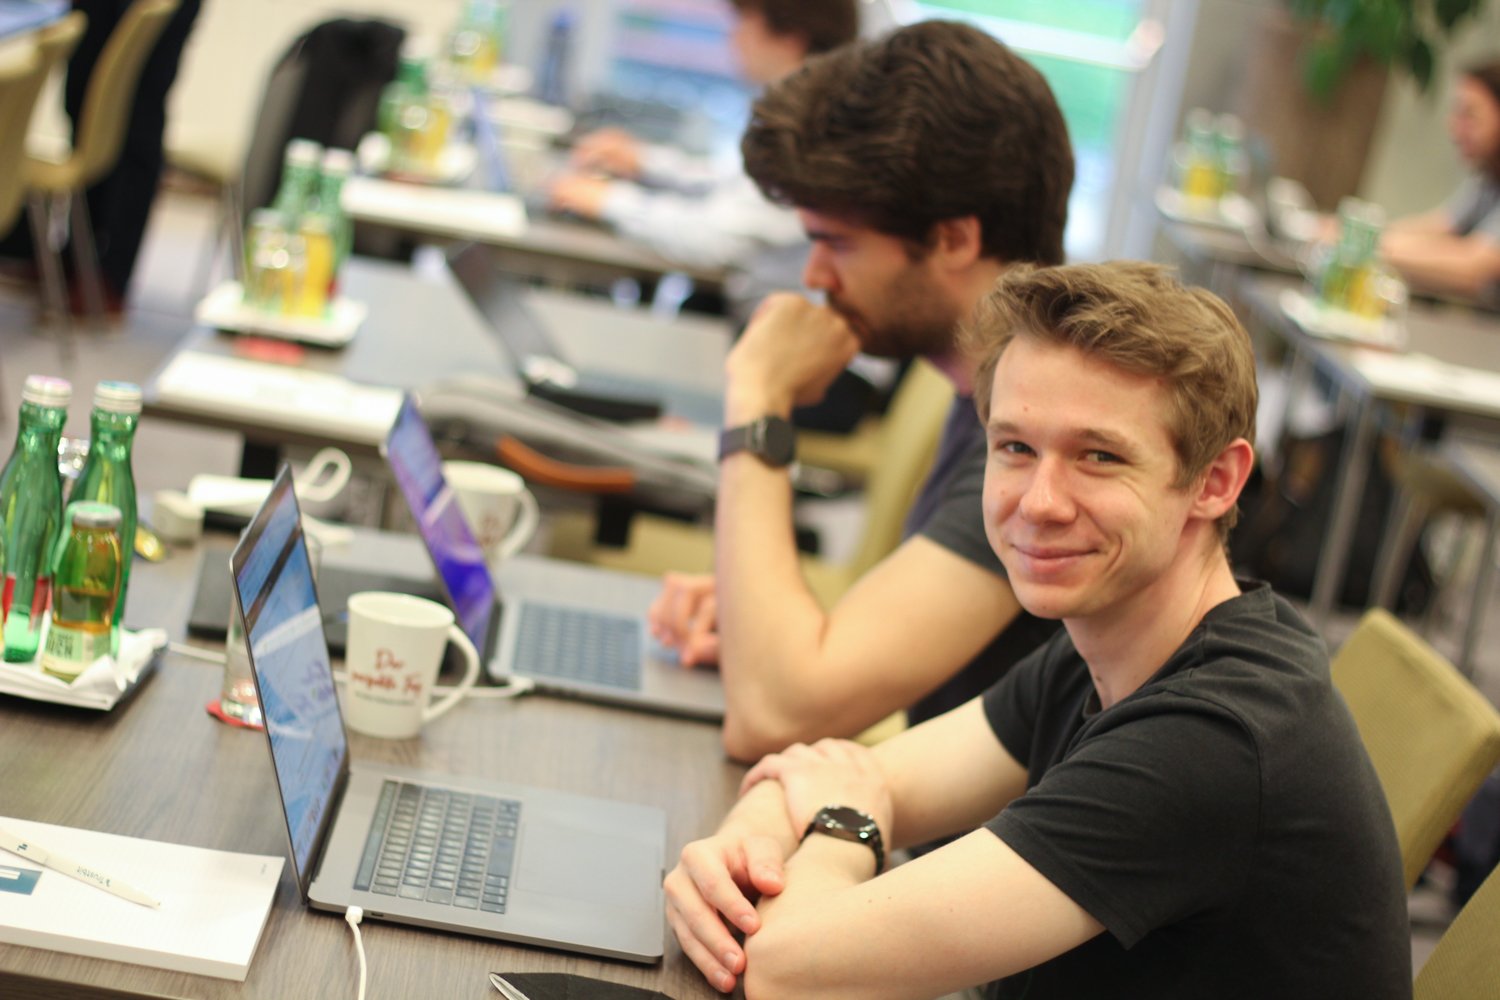 Markus smiling at the camera, sitting at his laptop next to Oscar during a hackathon